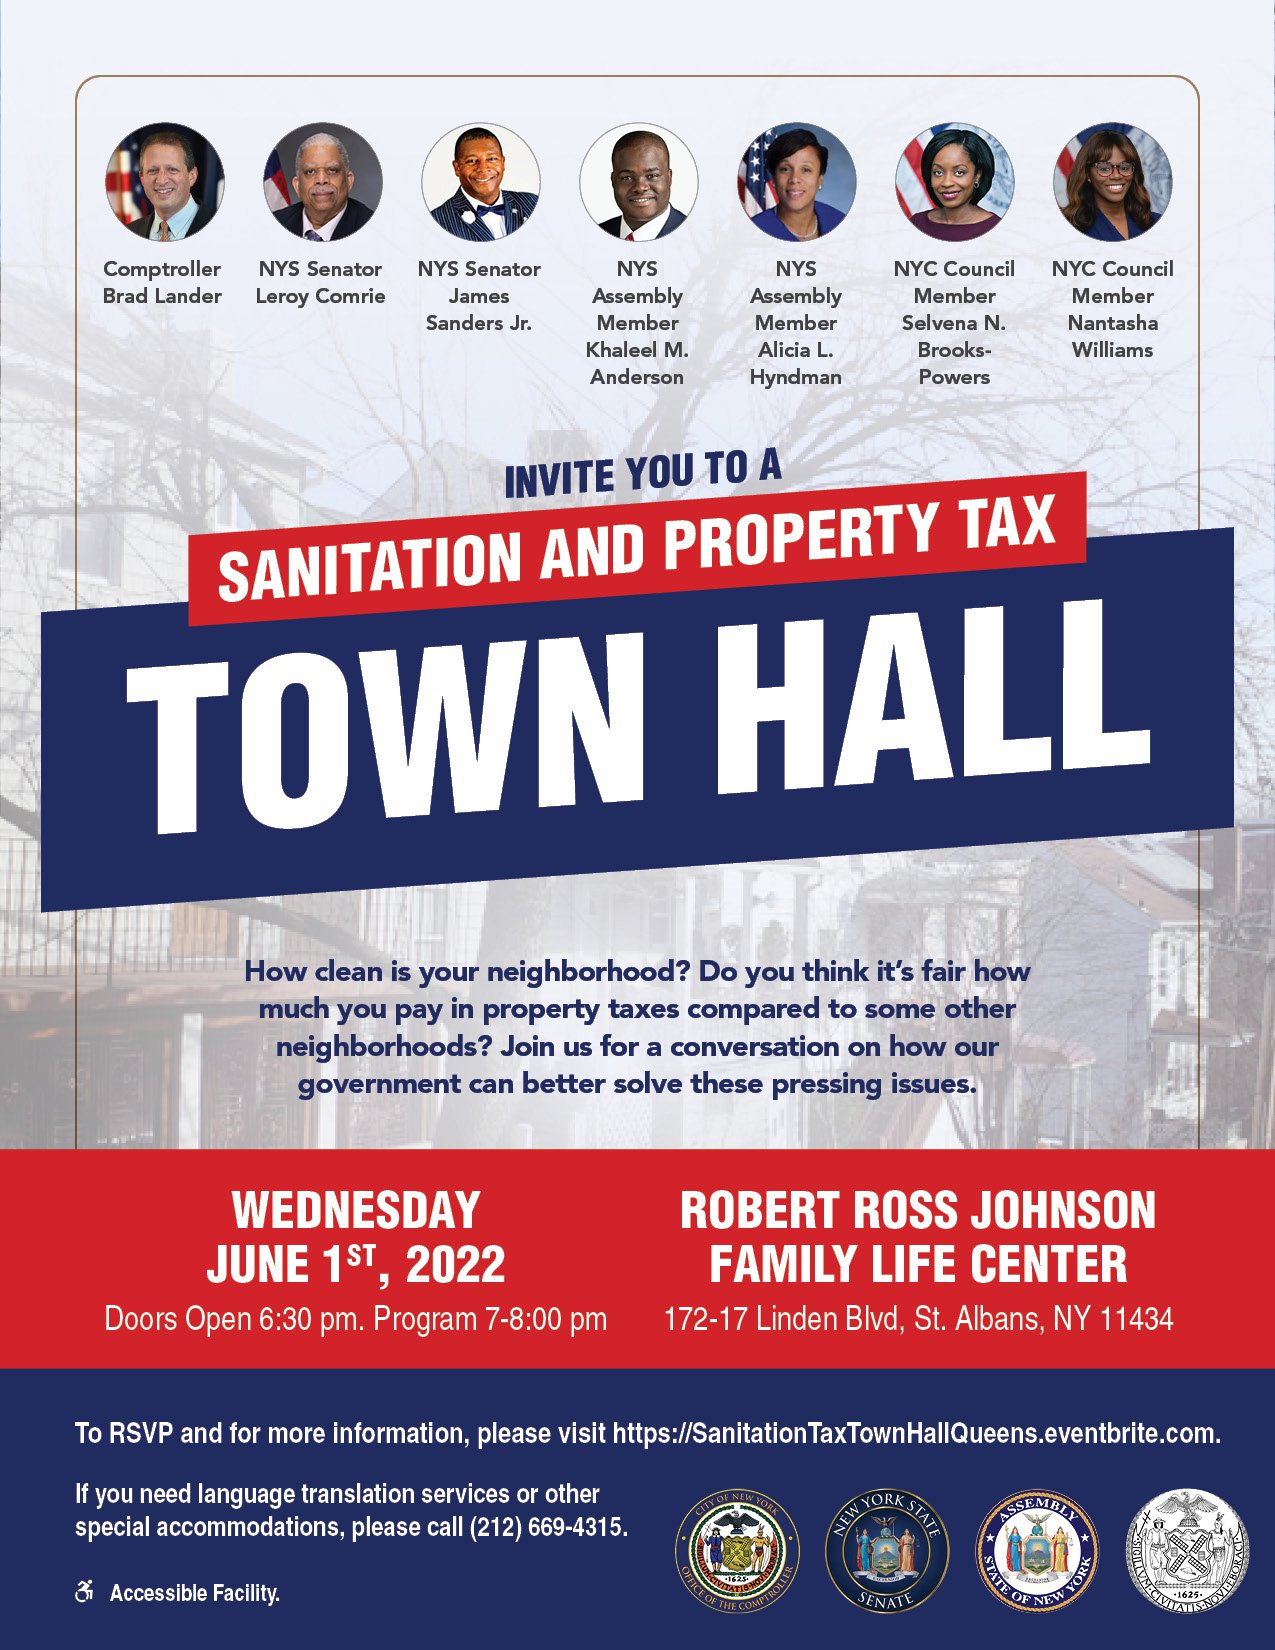 Queens Sanitation and Property Tax Town Hall